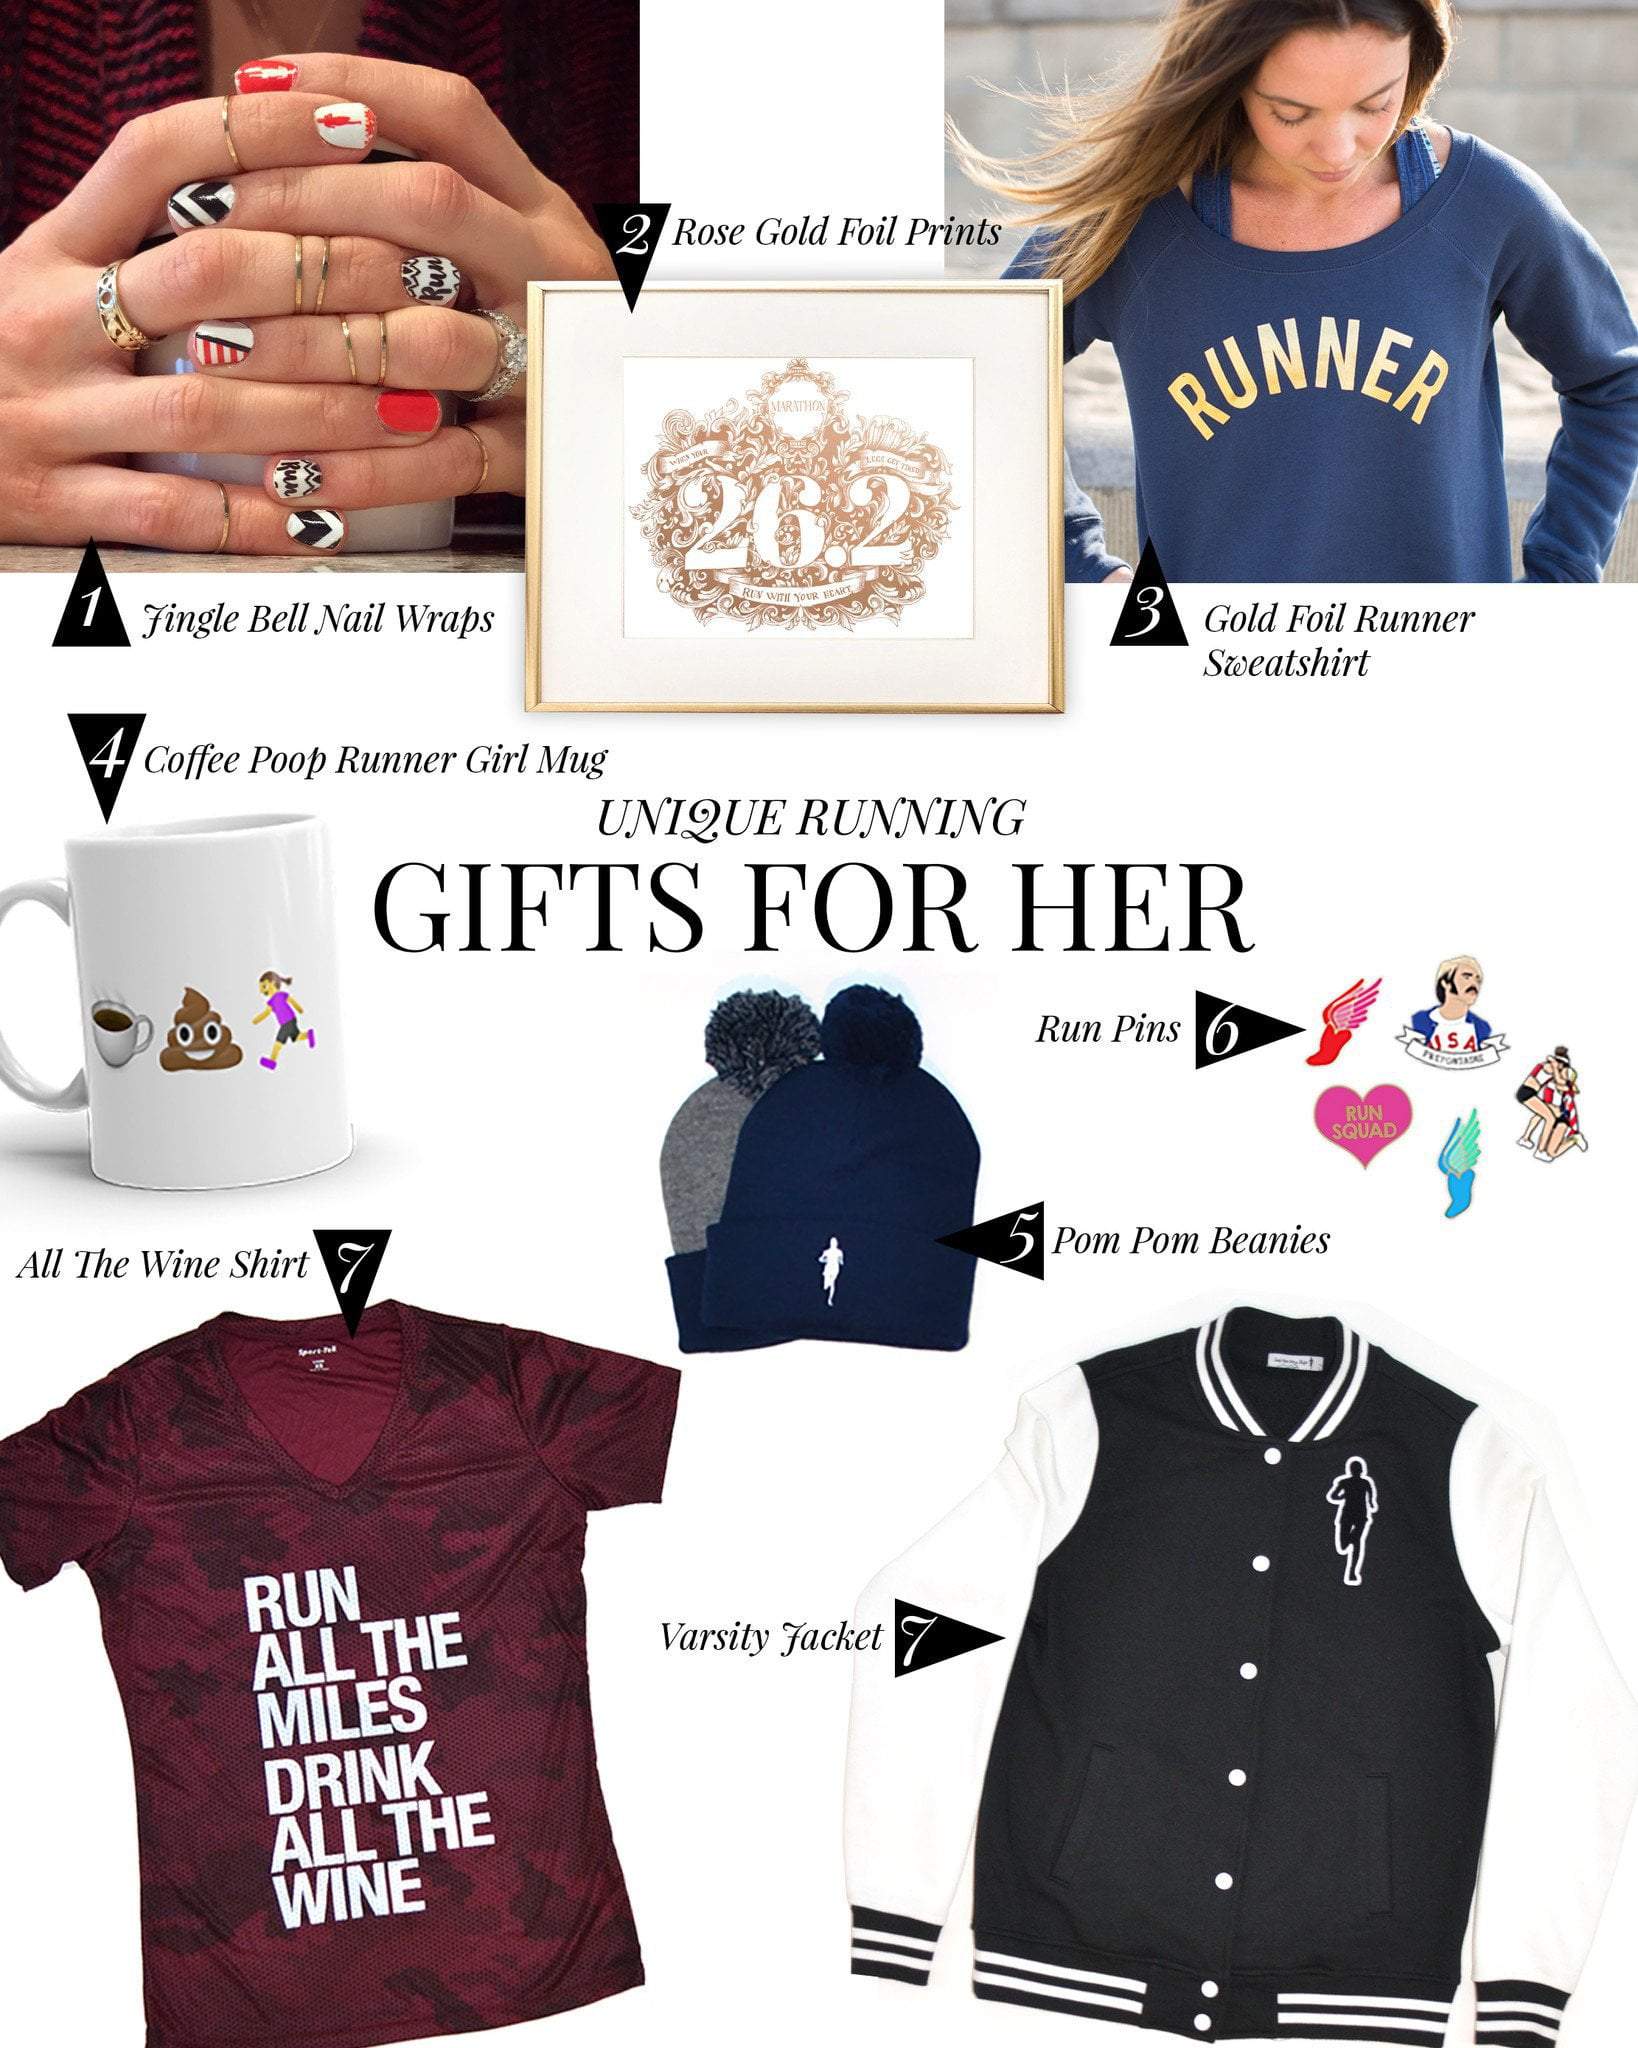 GIFTS FOR HER, HIM & THEN SOME: Runner Holiday Gift Guide - What to get the runner who has everything